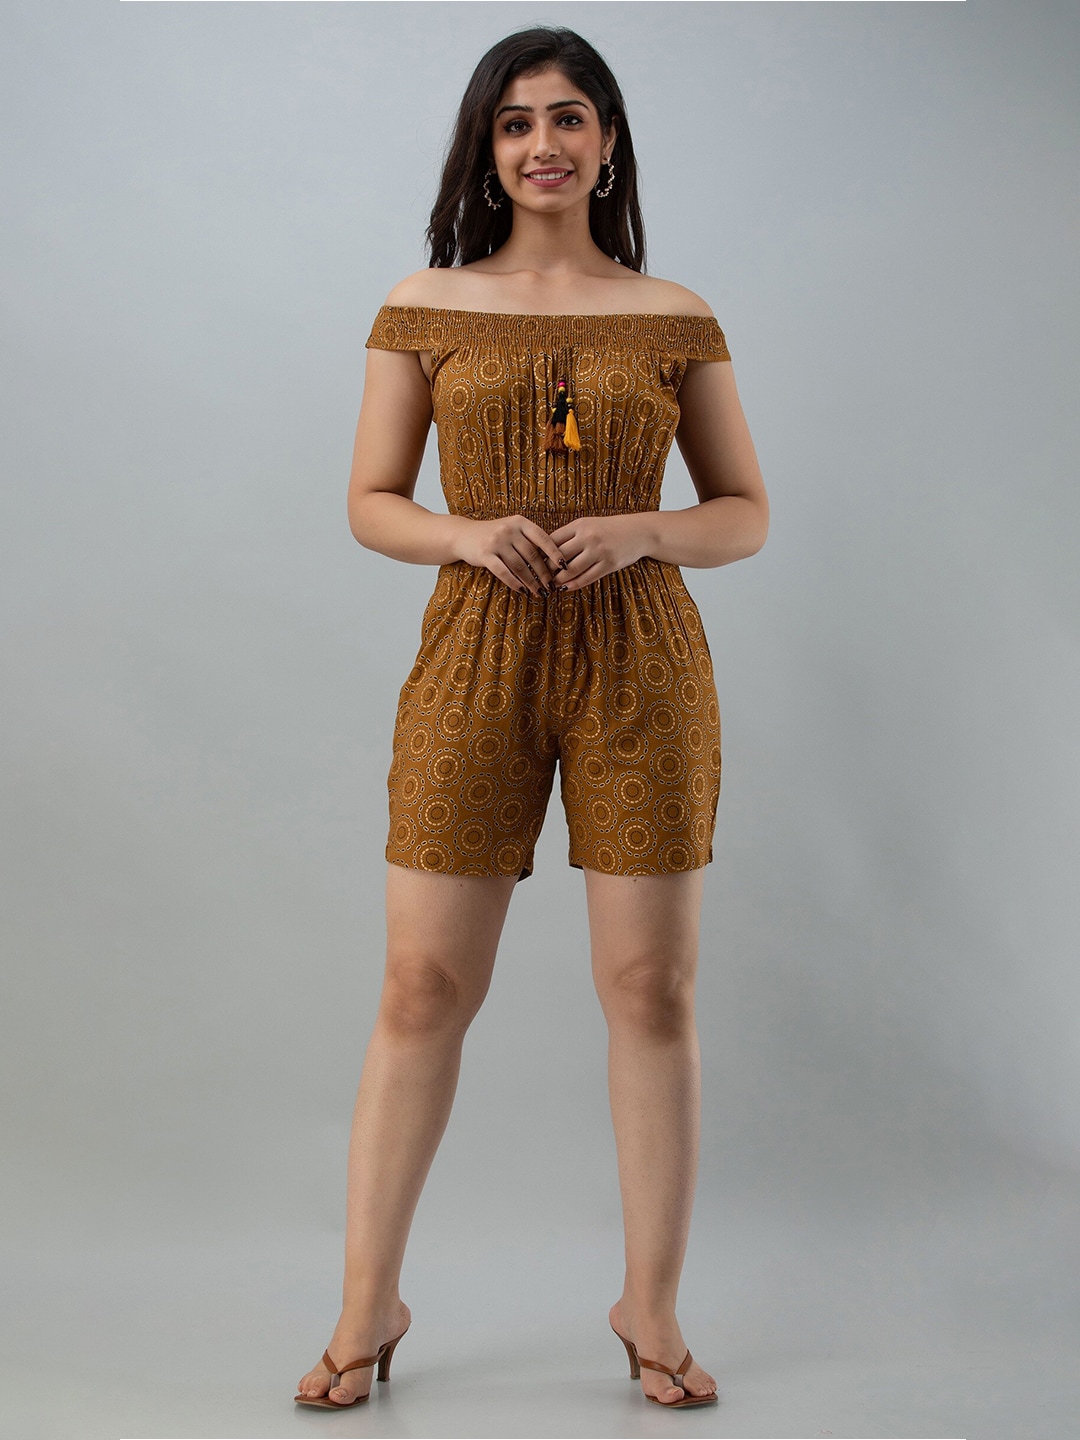 CKM Gold-Toned & Black Printed Jumpsuit Price in India